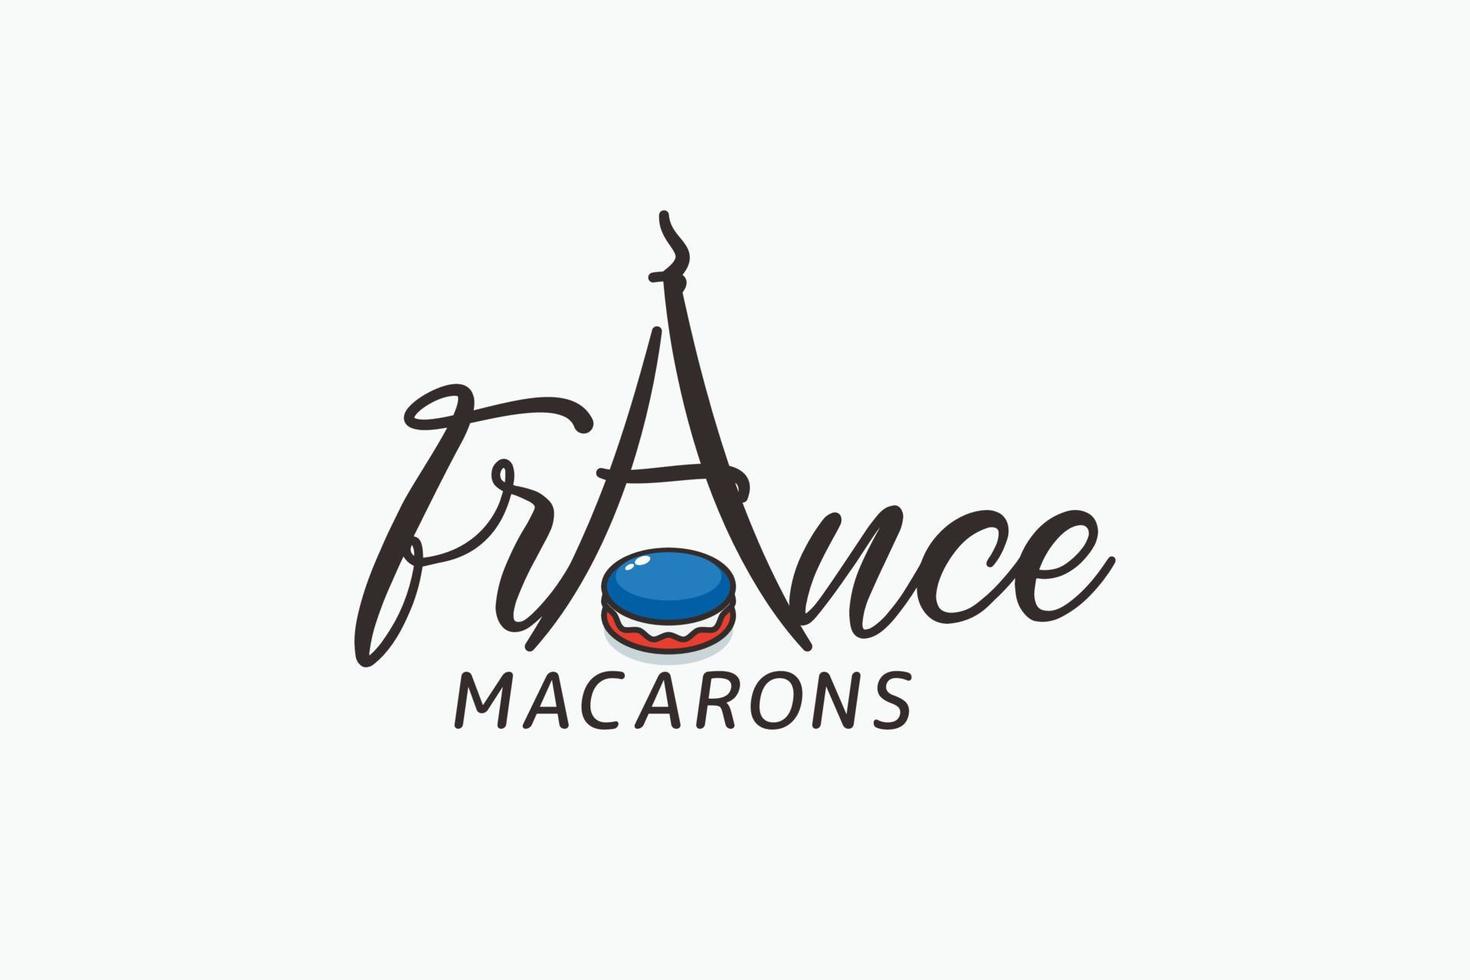 macarons logo with a macarons and Eiffel tower as letter A for any business, especially patisserie, bakery, cafe, etc. vector